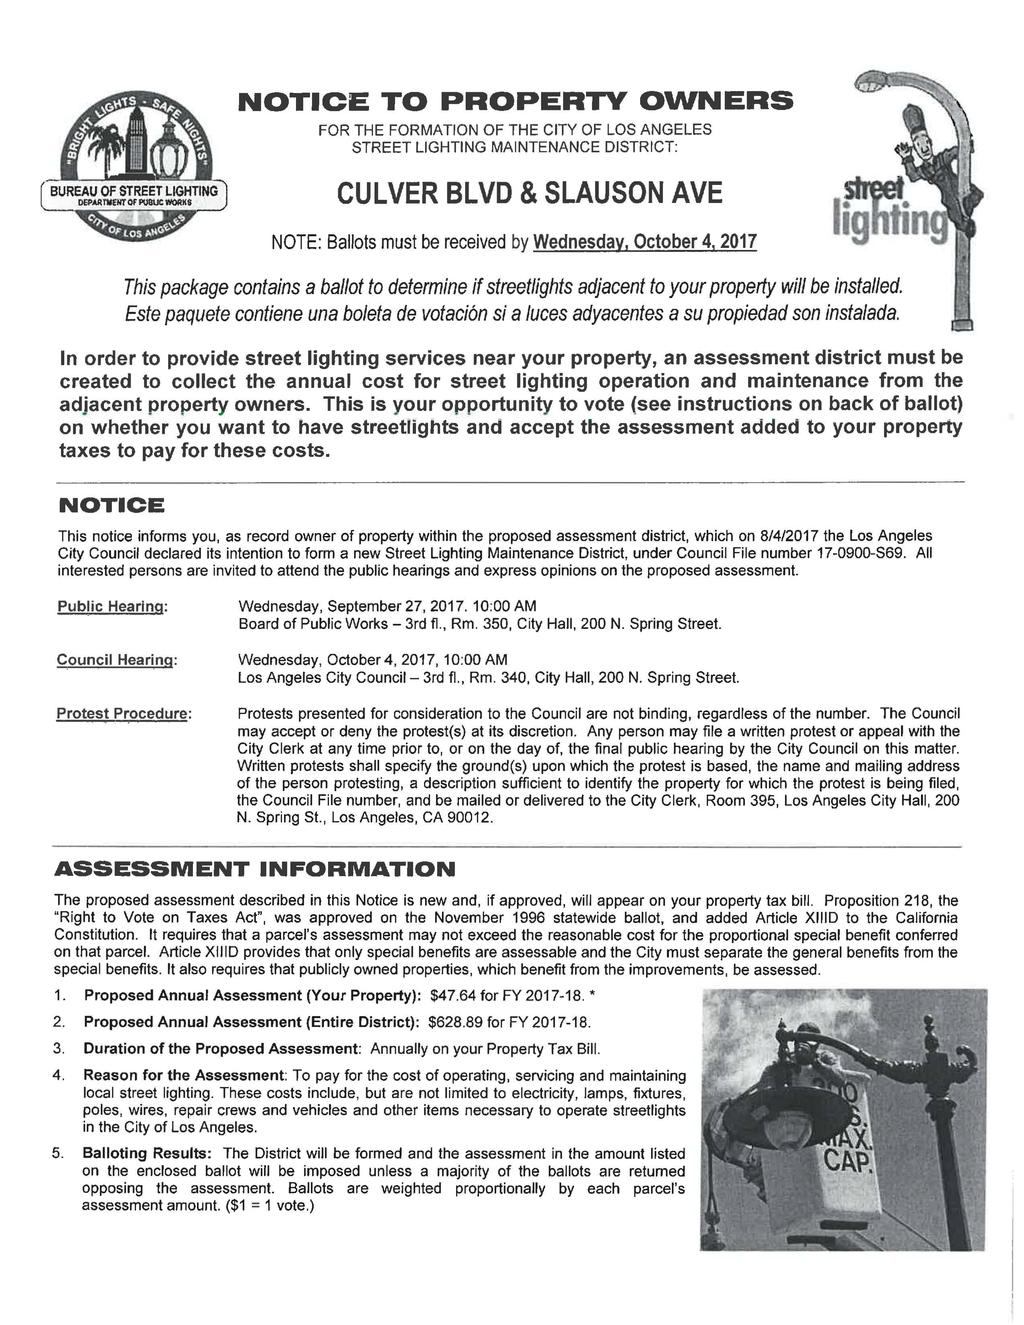 NOTICE TO PROPERTY OWNERS FOR THE FORMATION OF THE CITY OF LOS ANGELES STREET LIGHTING MAINTENANCE DISTRICT: BUREAU OF STREET LIGHTING DEPARTMENT OF PU8LE WORKS CULVER BLVD & SLAUSON AVE Iigntin